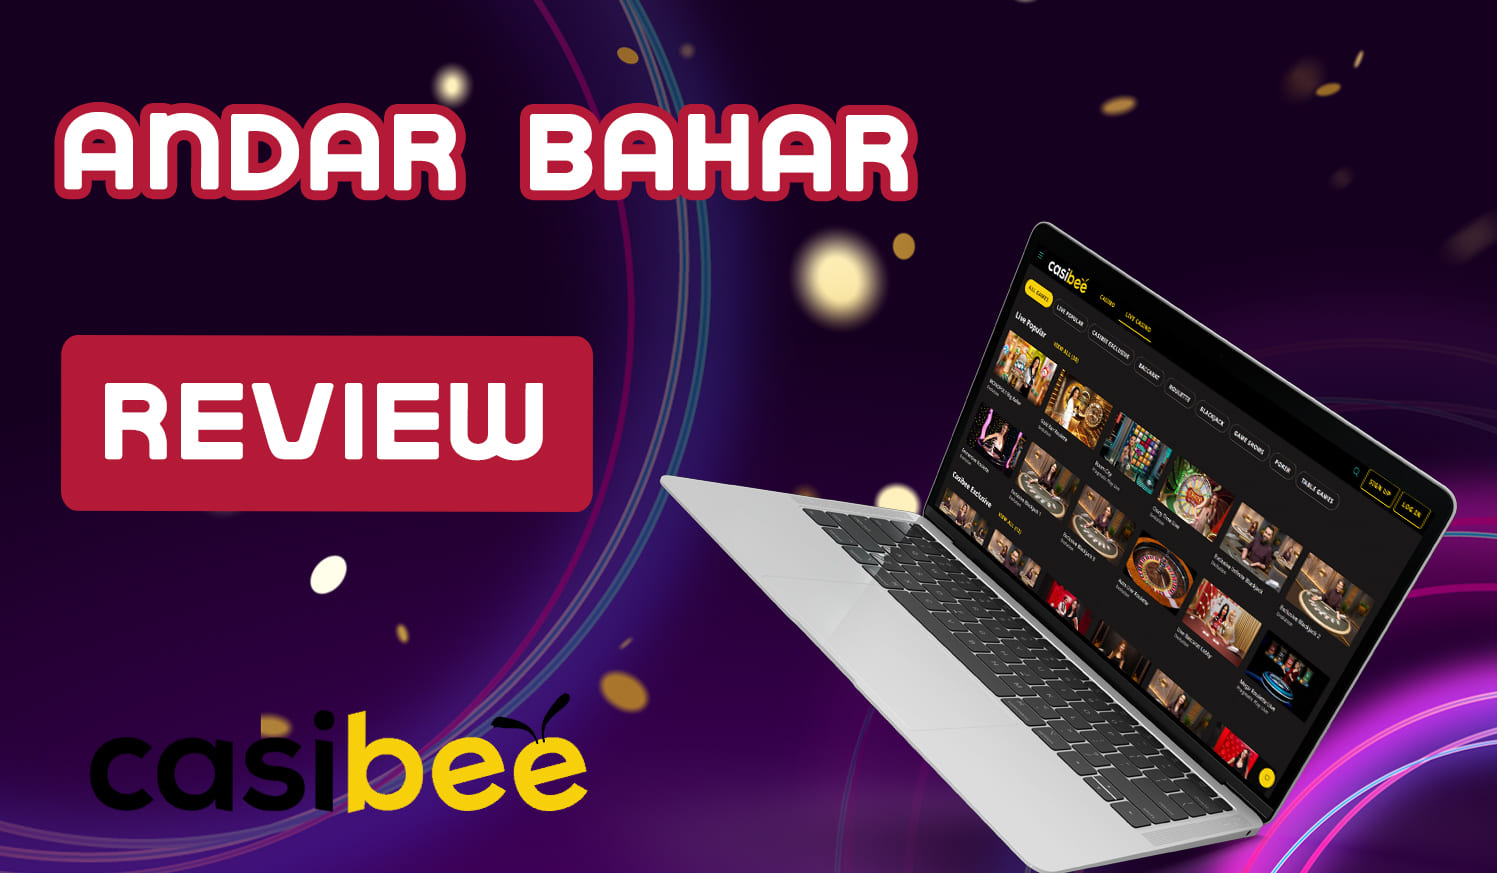 Casibee online casino review for playing Andar Bahar